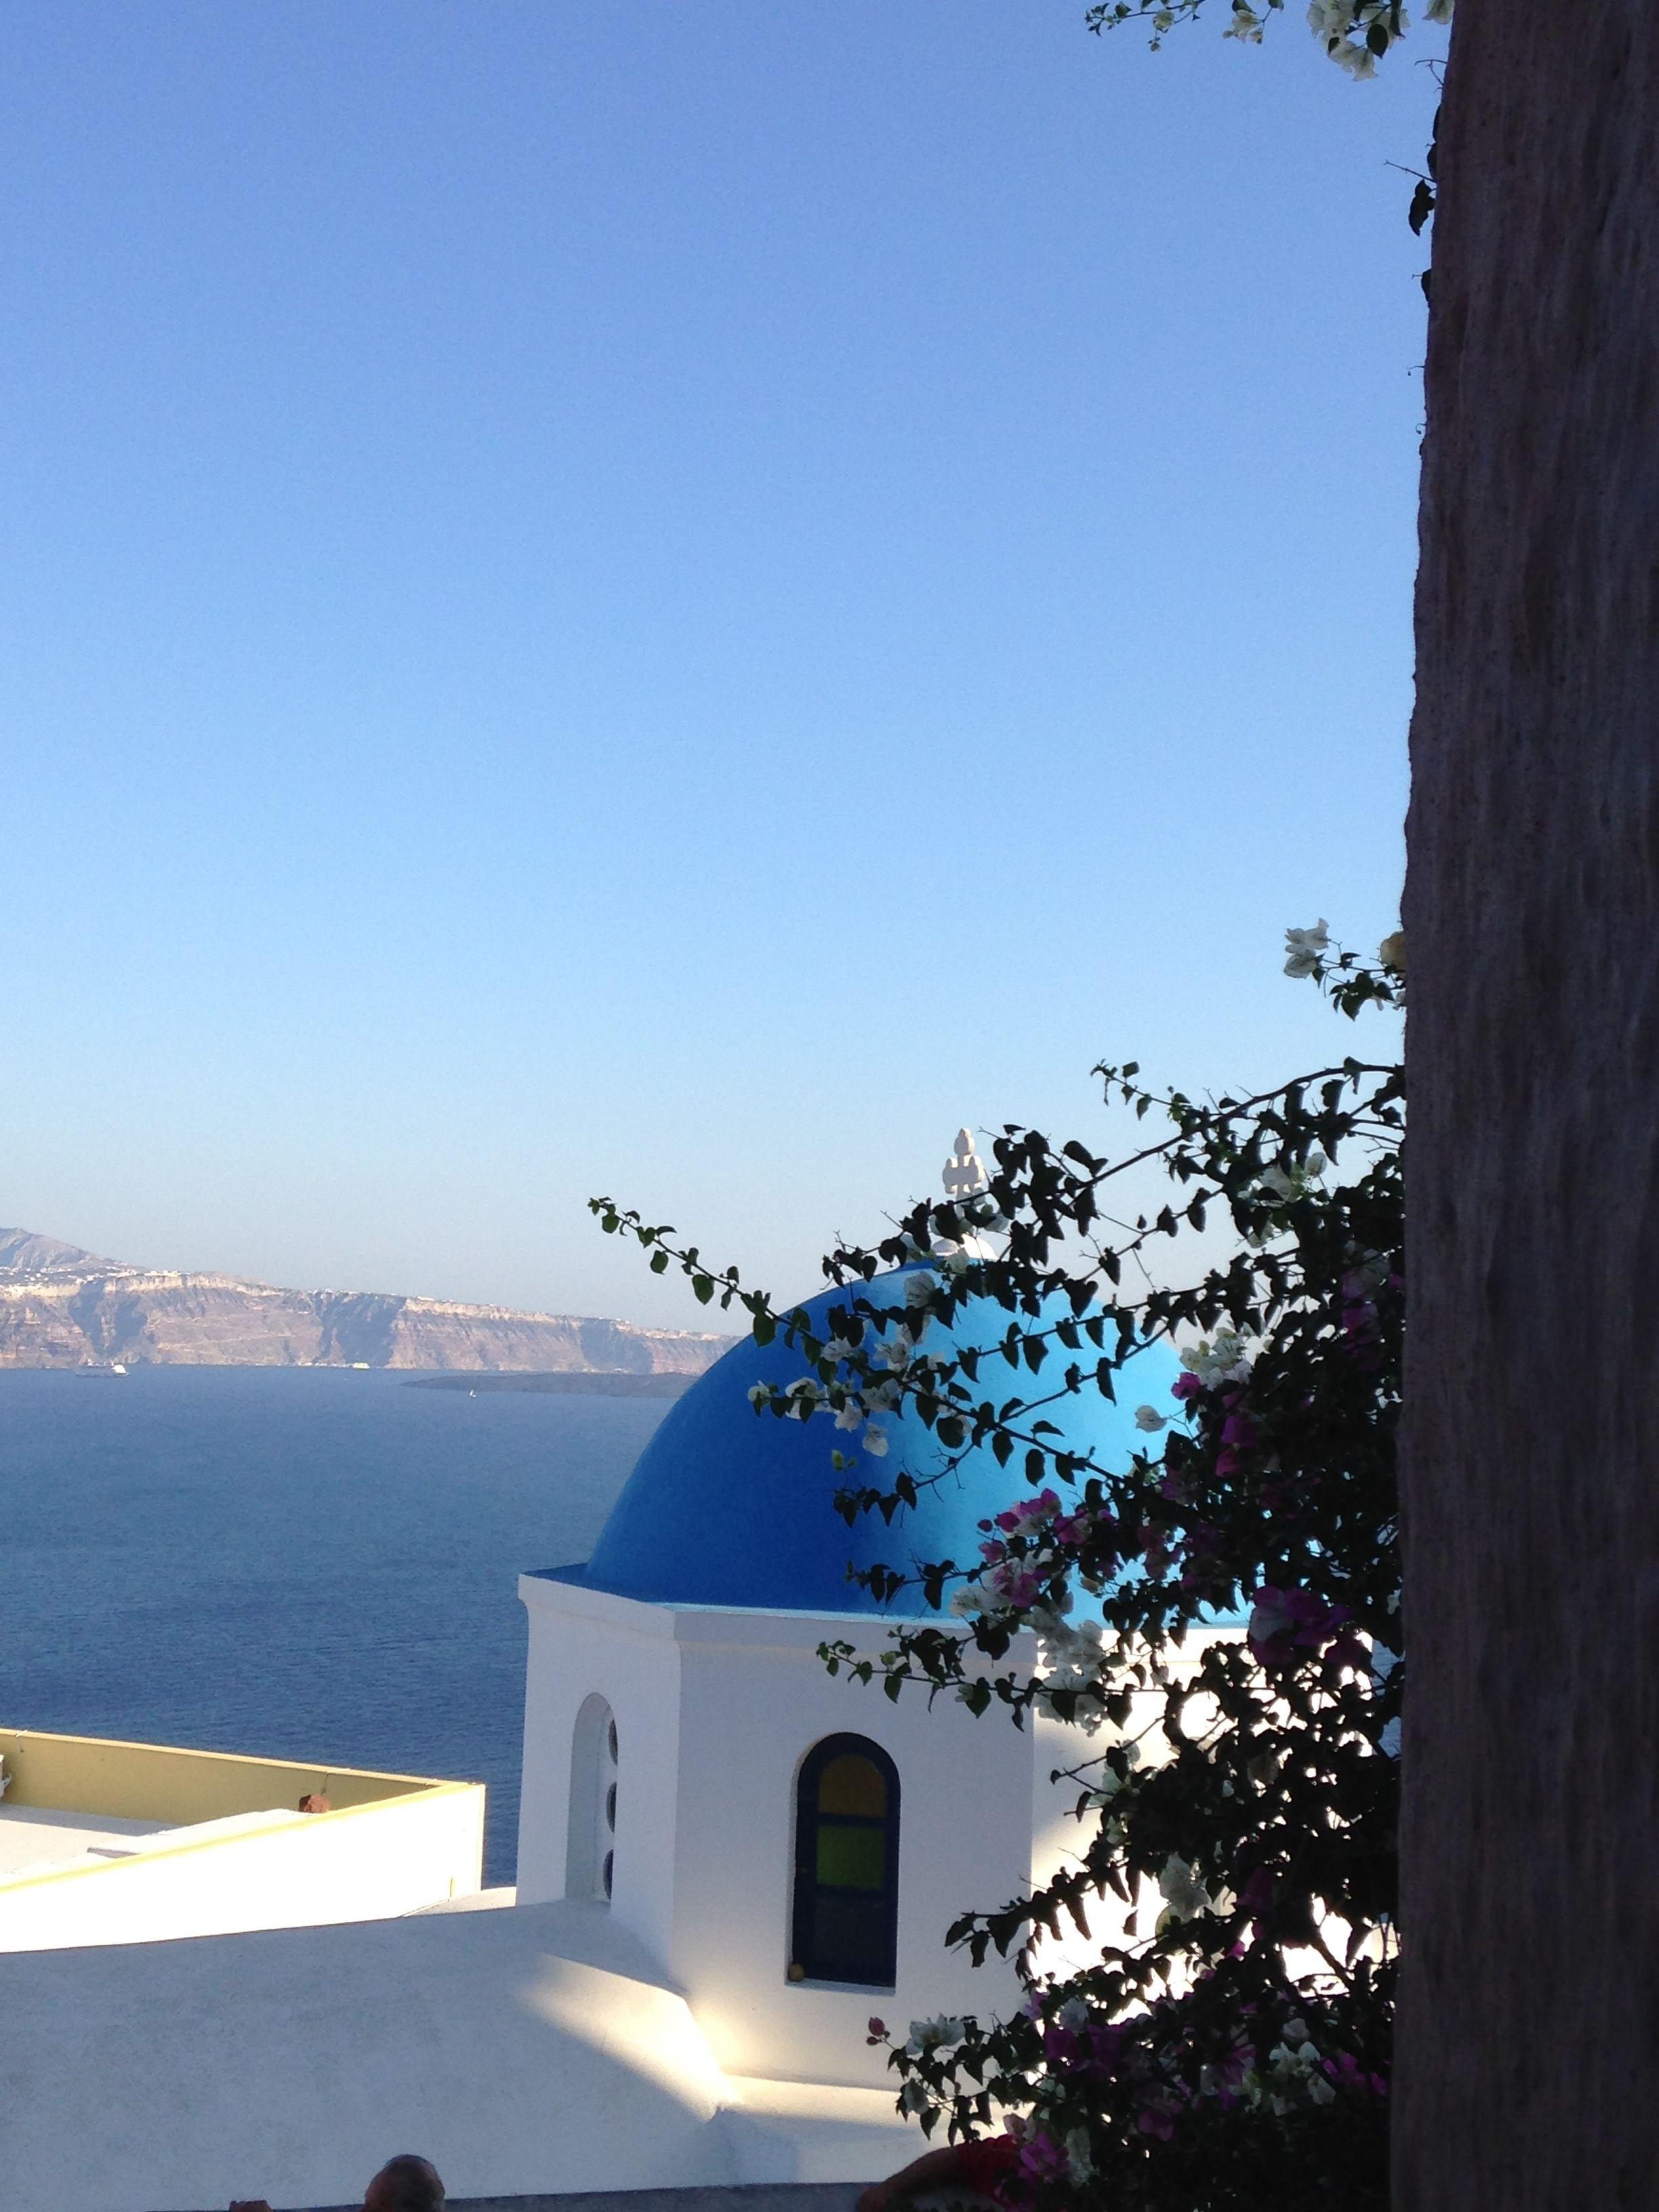 iPhone Wallpaper from Greece from Shilpa Ahuja